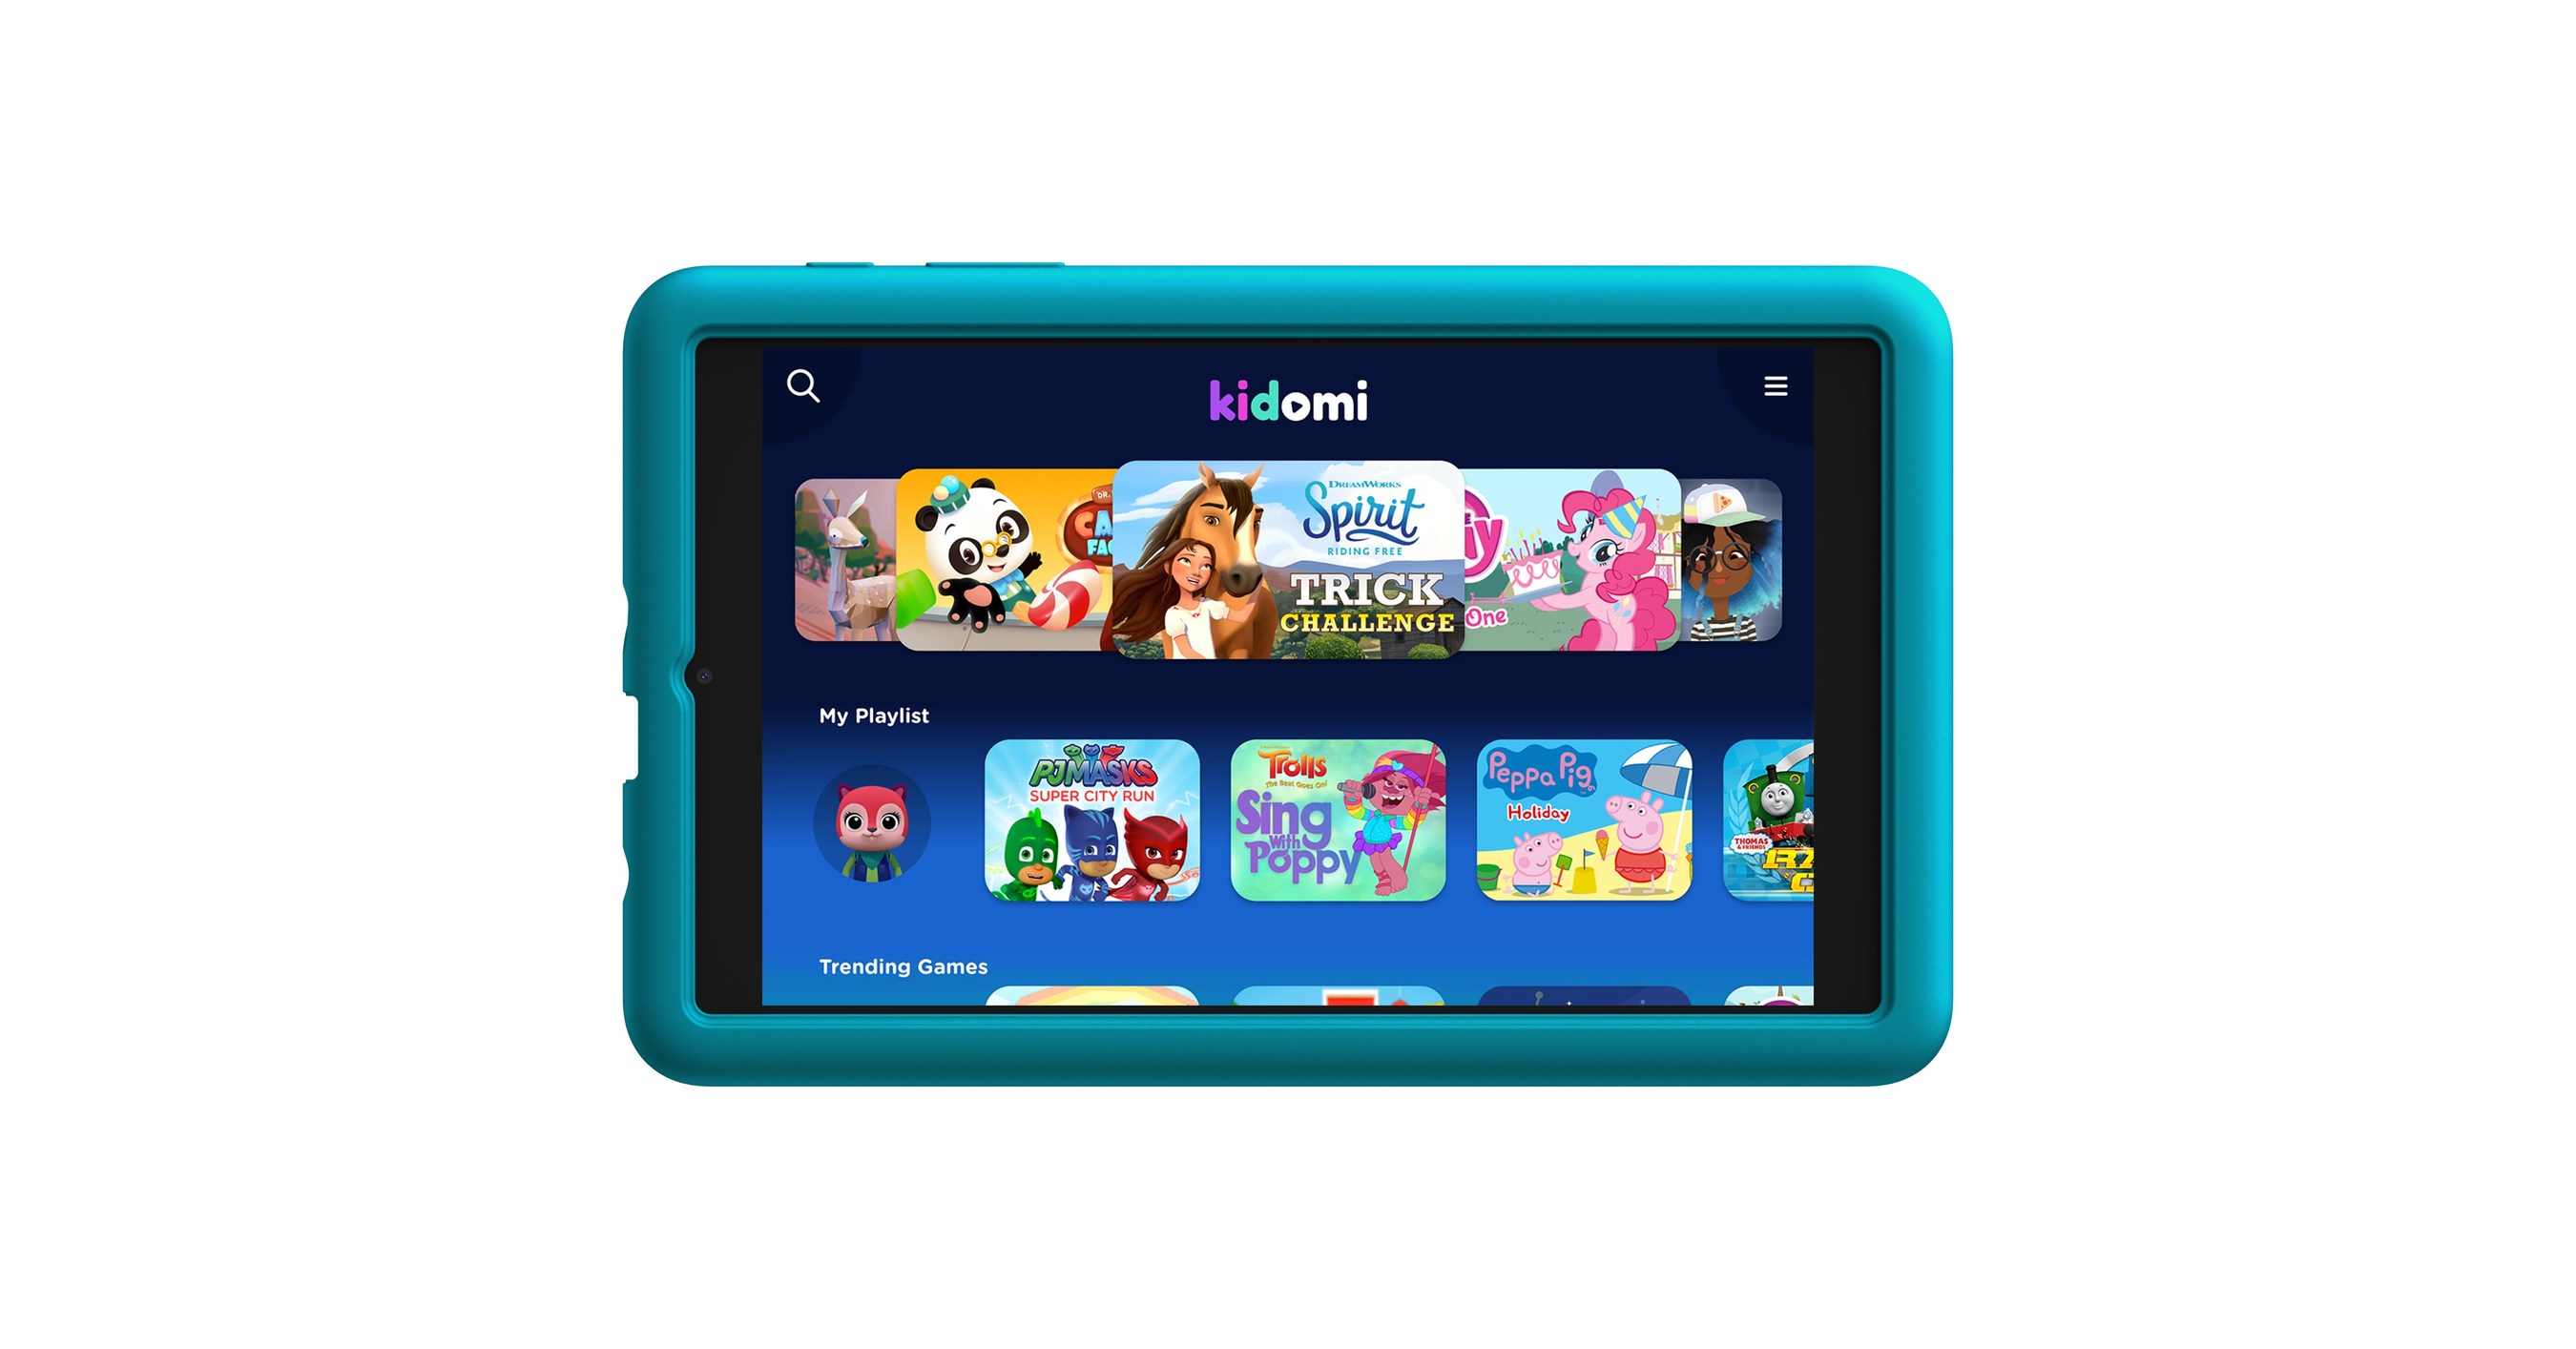 Alcatel JOY TAB KIDS 2 educational tablet lets kids learn and play